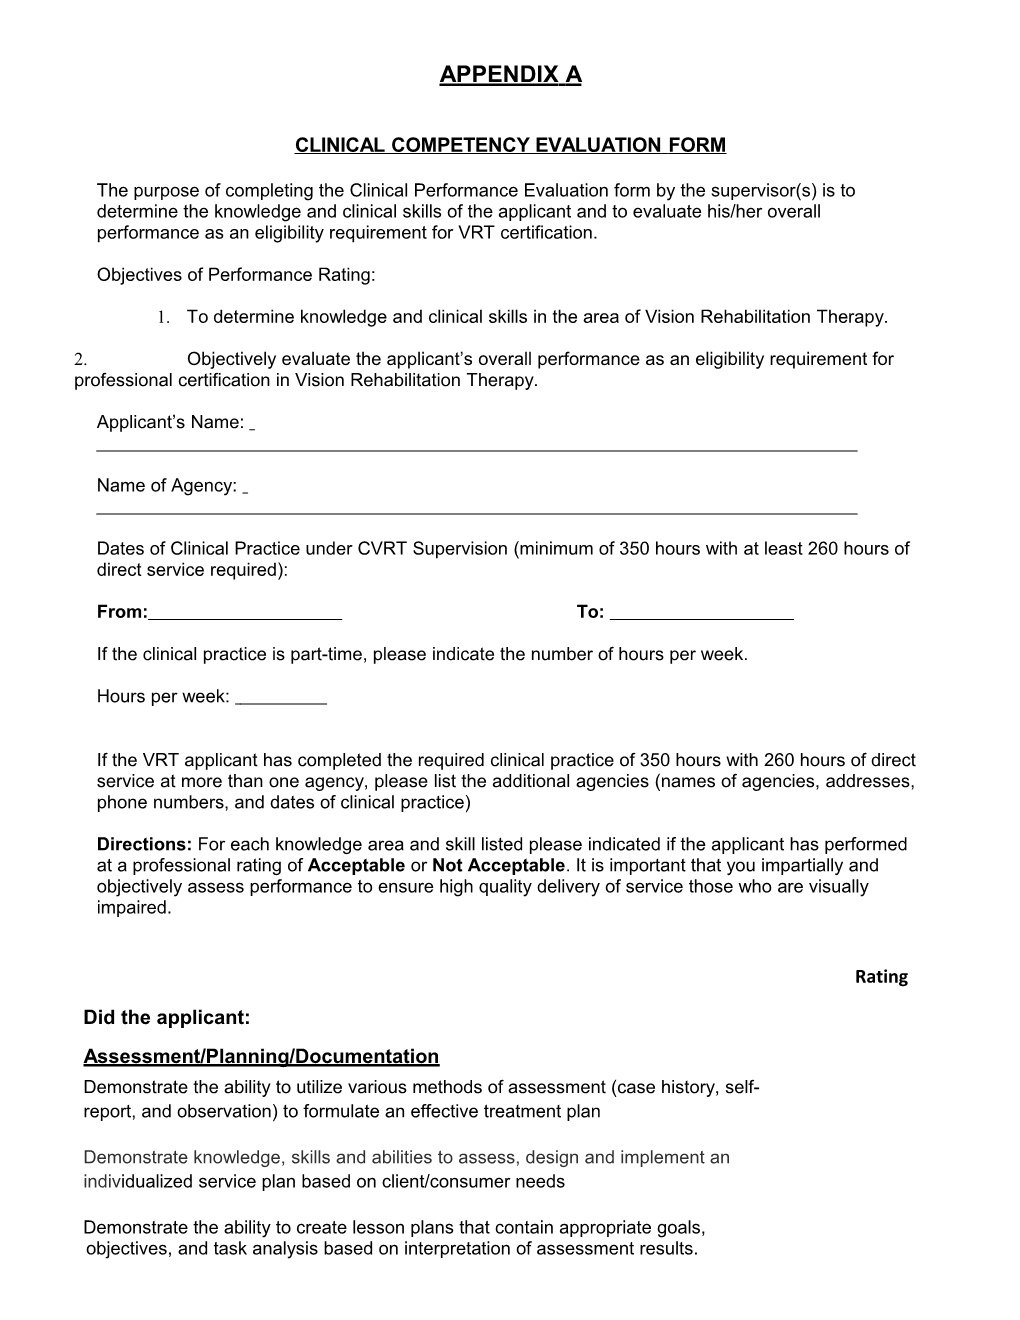 Clinical Competency Evaluationform